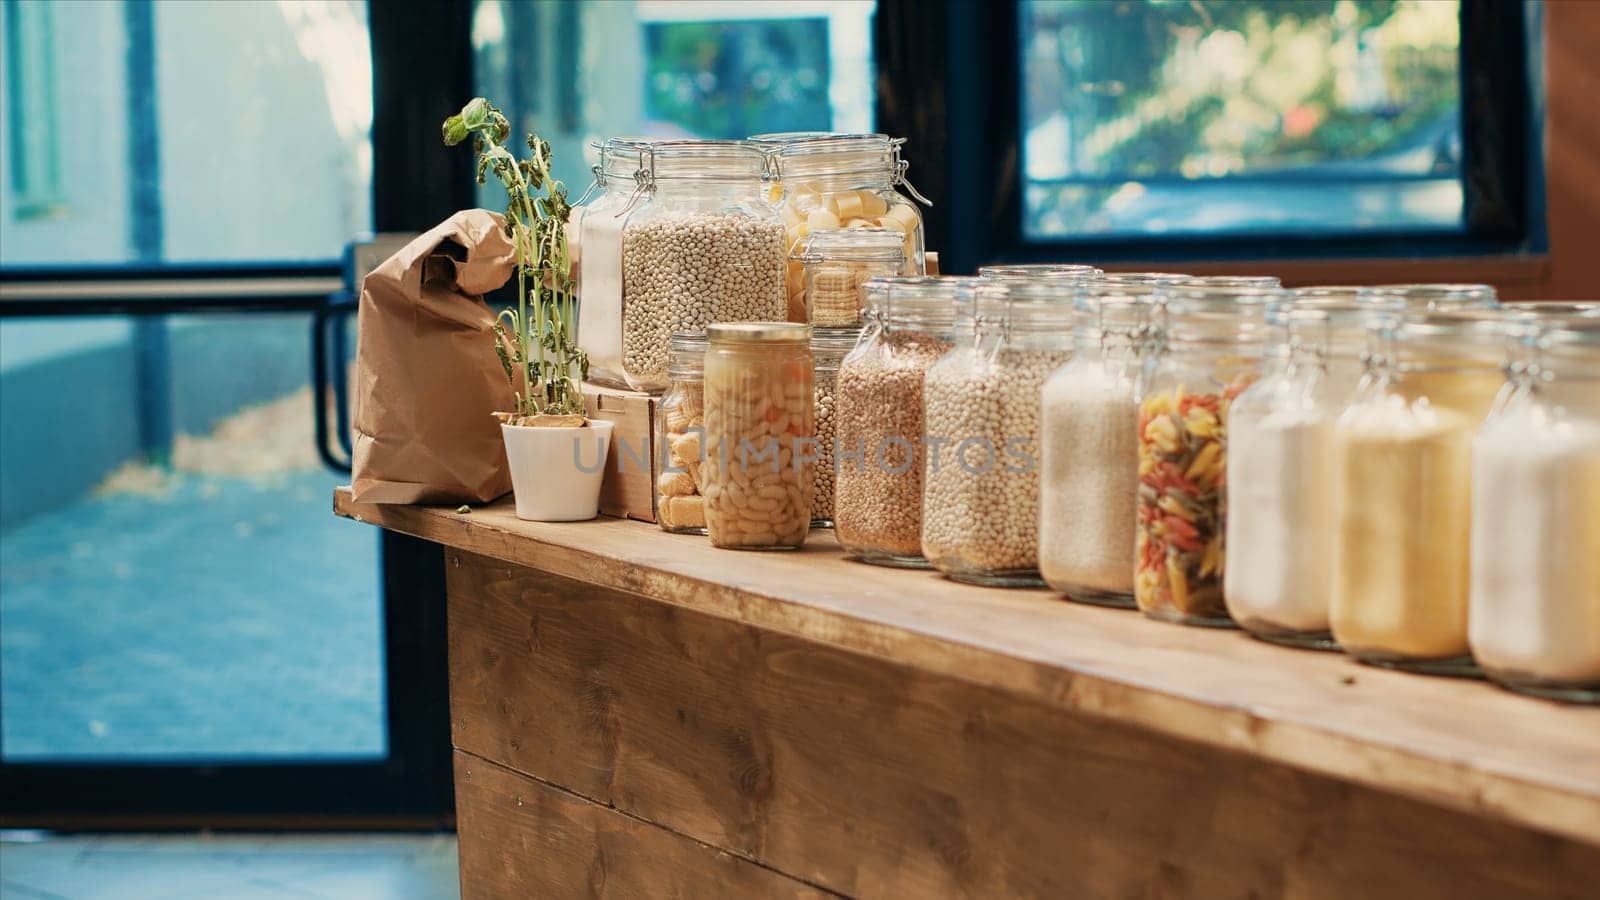 Chemicals free pasta and cereals in eco friendly supermarket, pantry supplies displayed in reusable glass jars on shelves. Organic fresh food and homemade sauces for sustainable lifestyle.